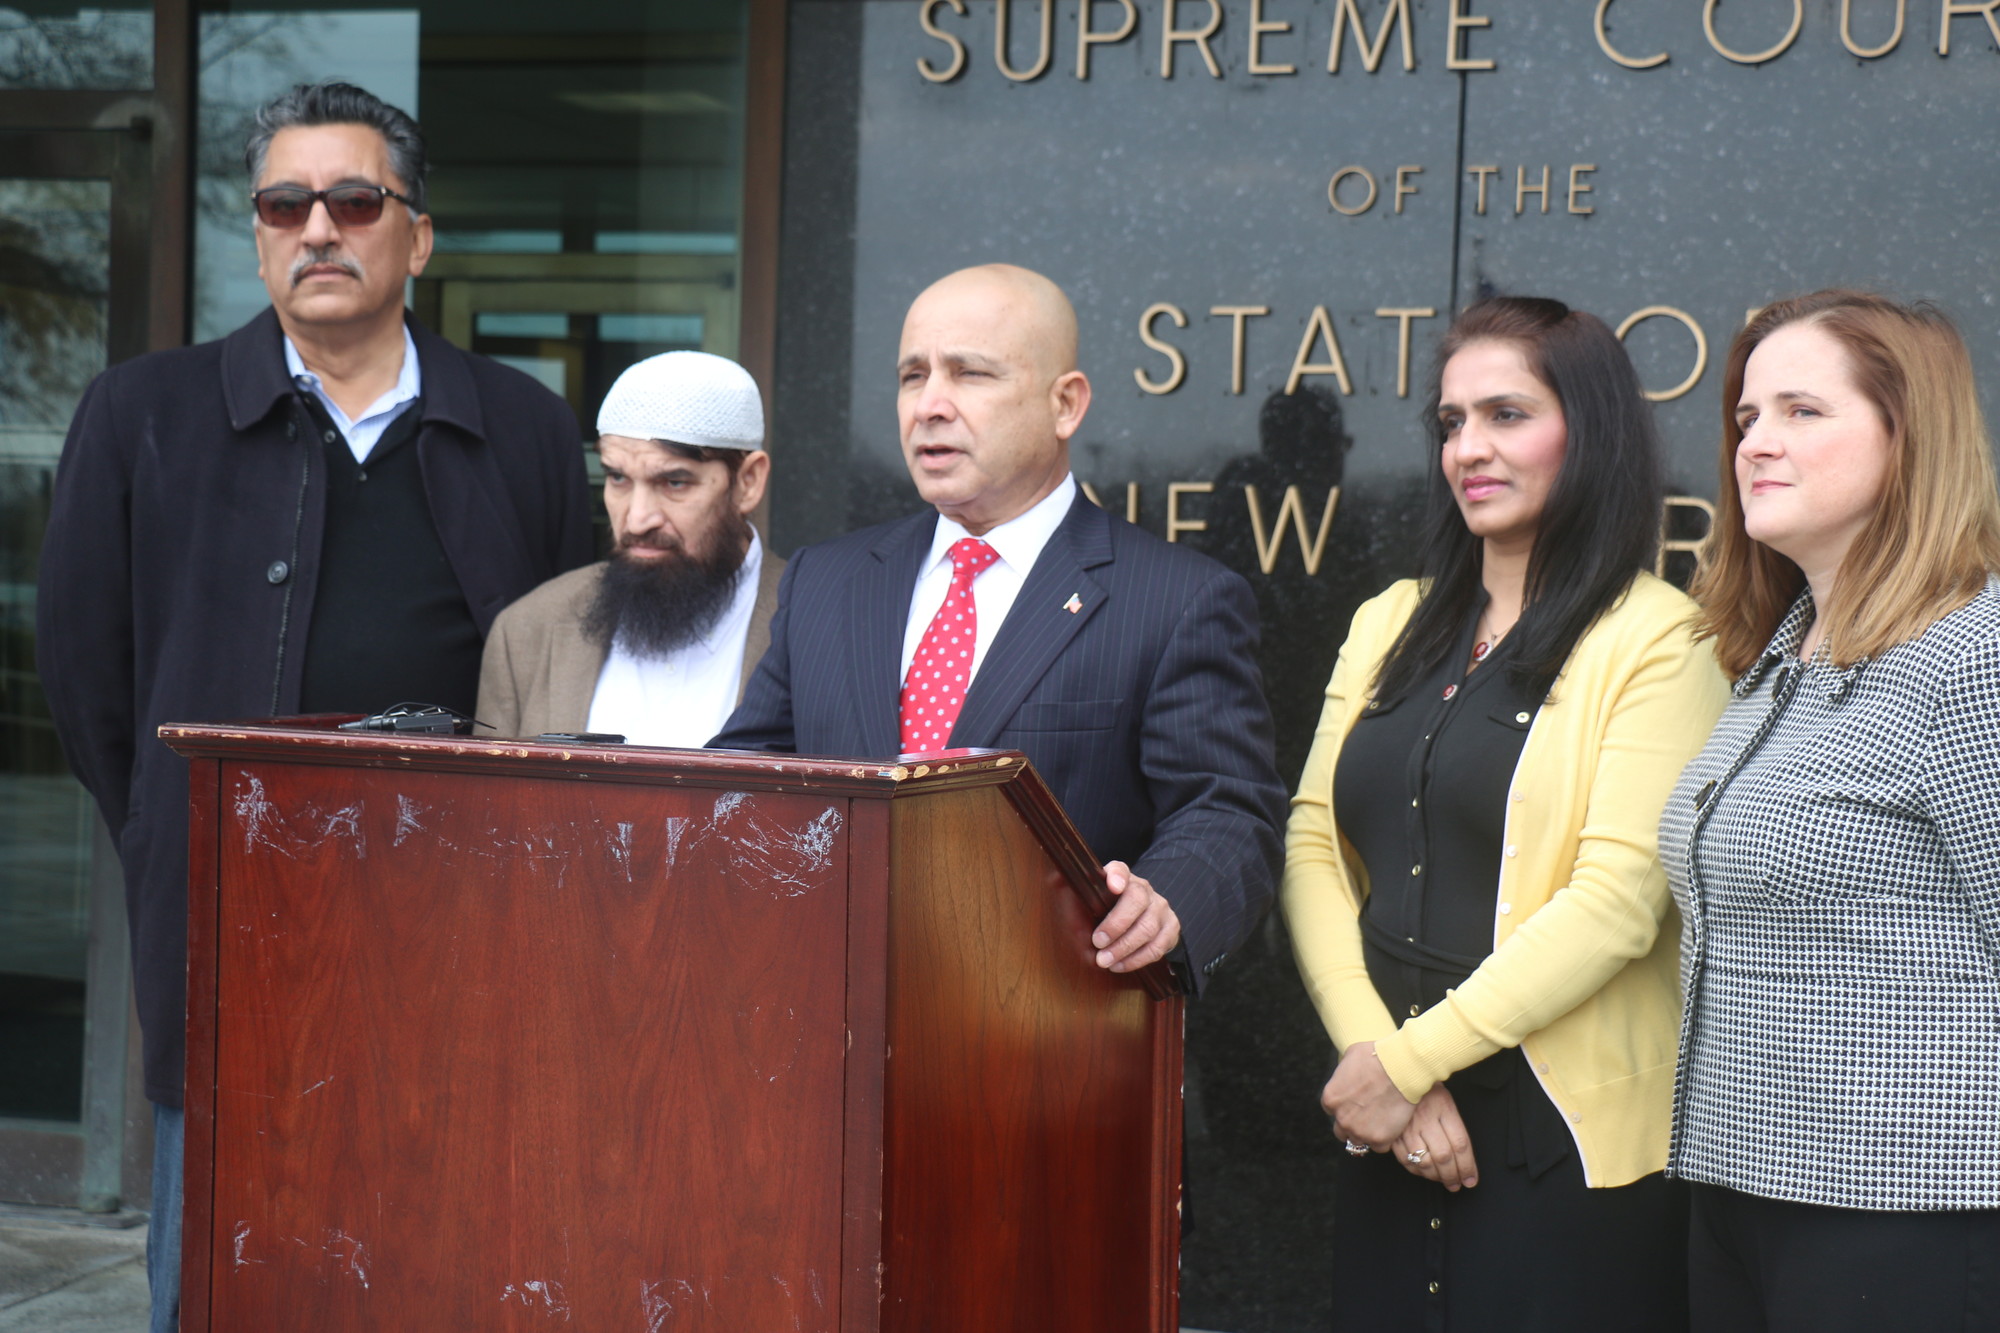 Ali Mirza, center, organized the news conference. He was joined by, from left, Ijaz Bokhari, imam Mohammad Usman, Jaweria Safdar-Mirza and Mary Moreno.